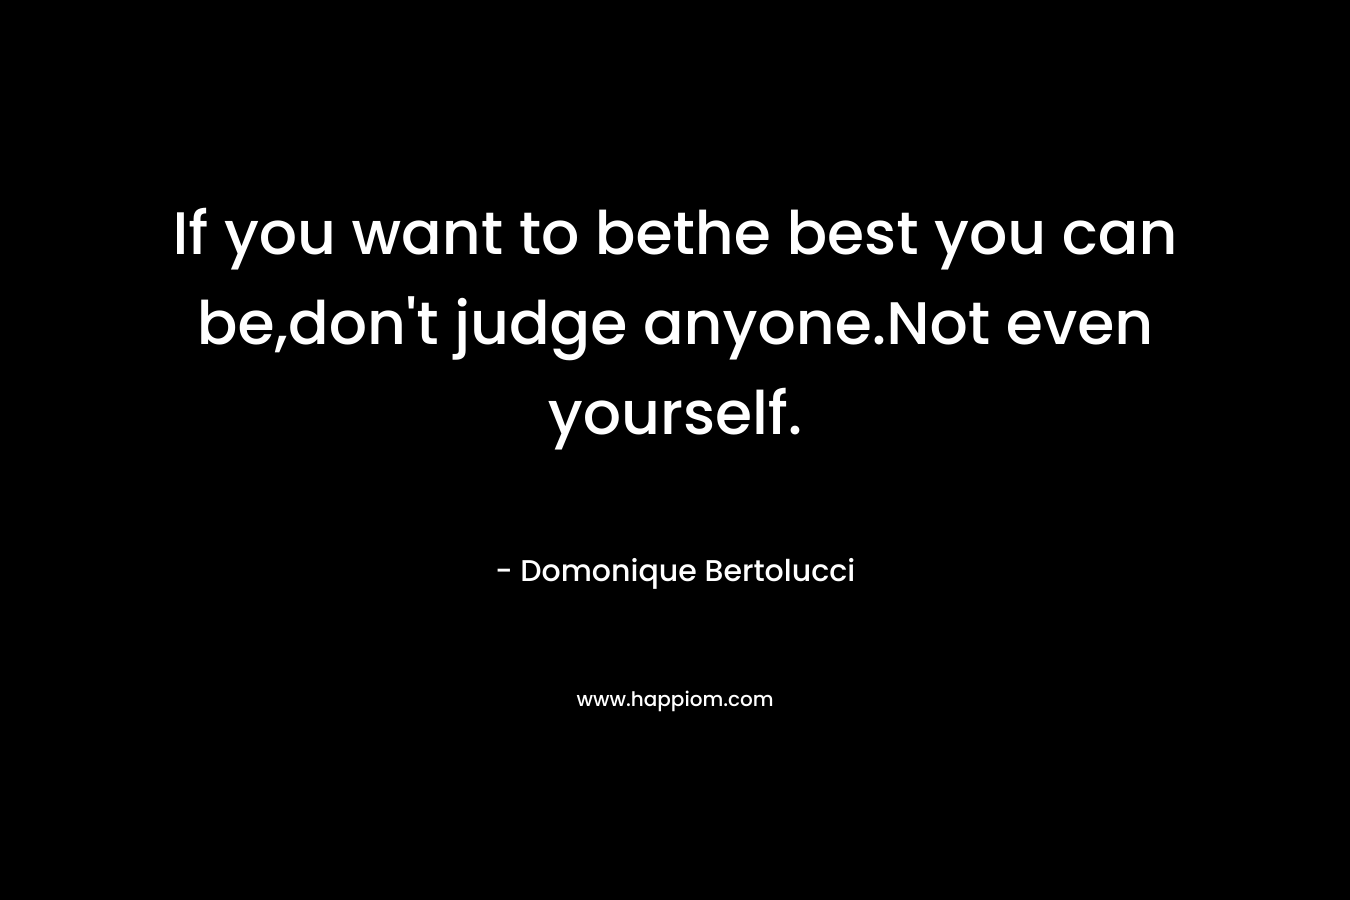 If you want to bethe best you can be,don’t judge anyone.Not even yourself. – Domonique Bertolucci